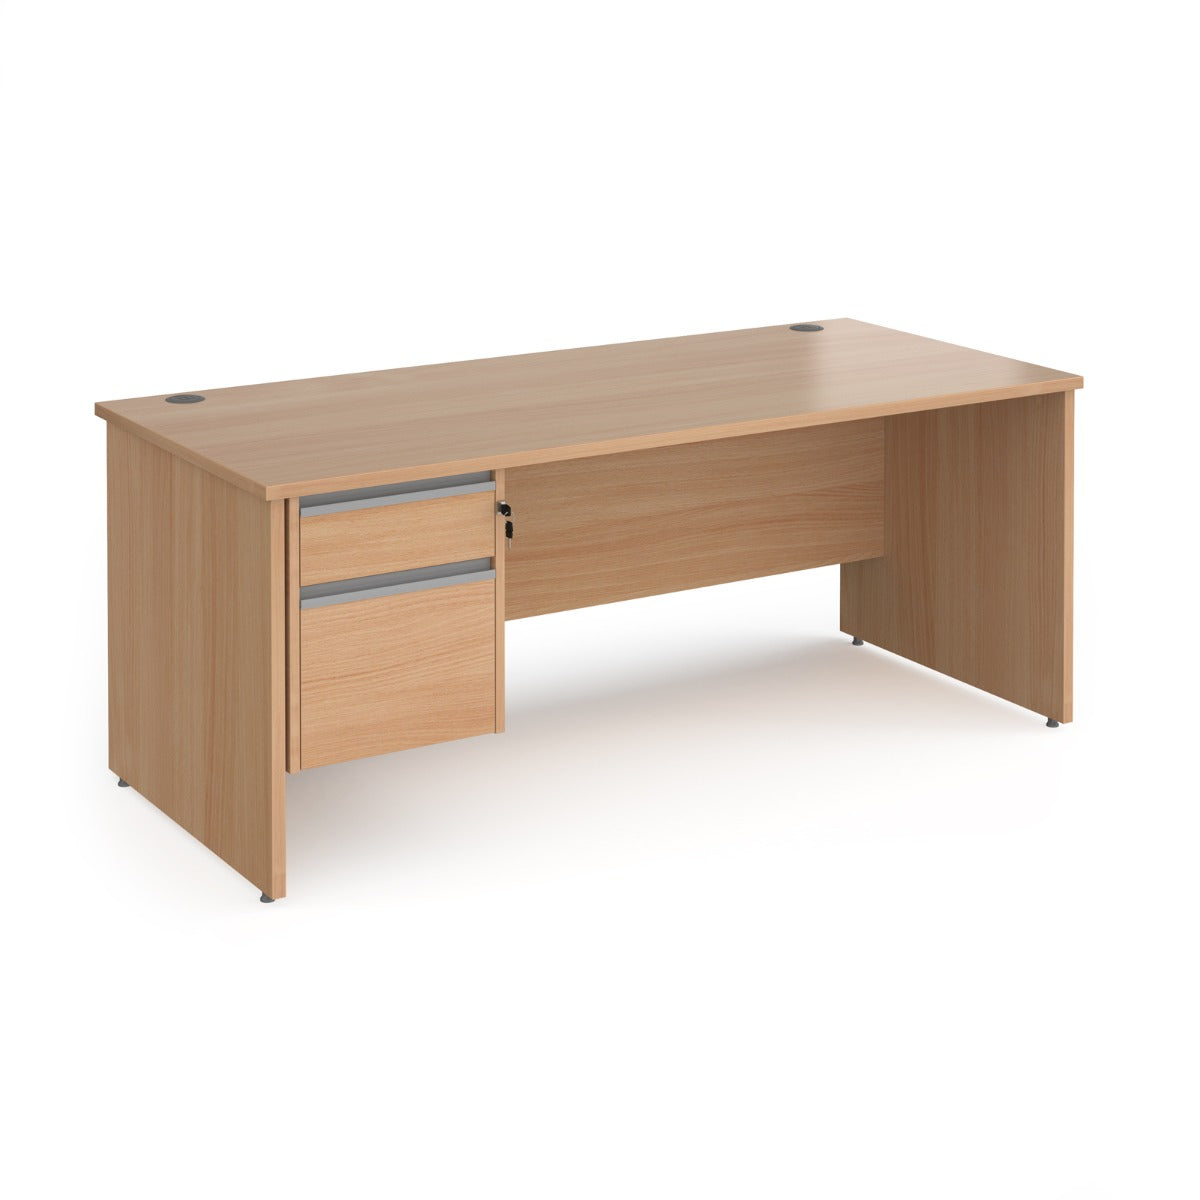 Contract Panel Leg Straight Office Desk with Two Drawer Storage